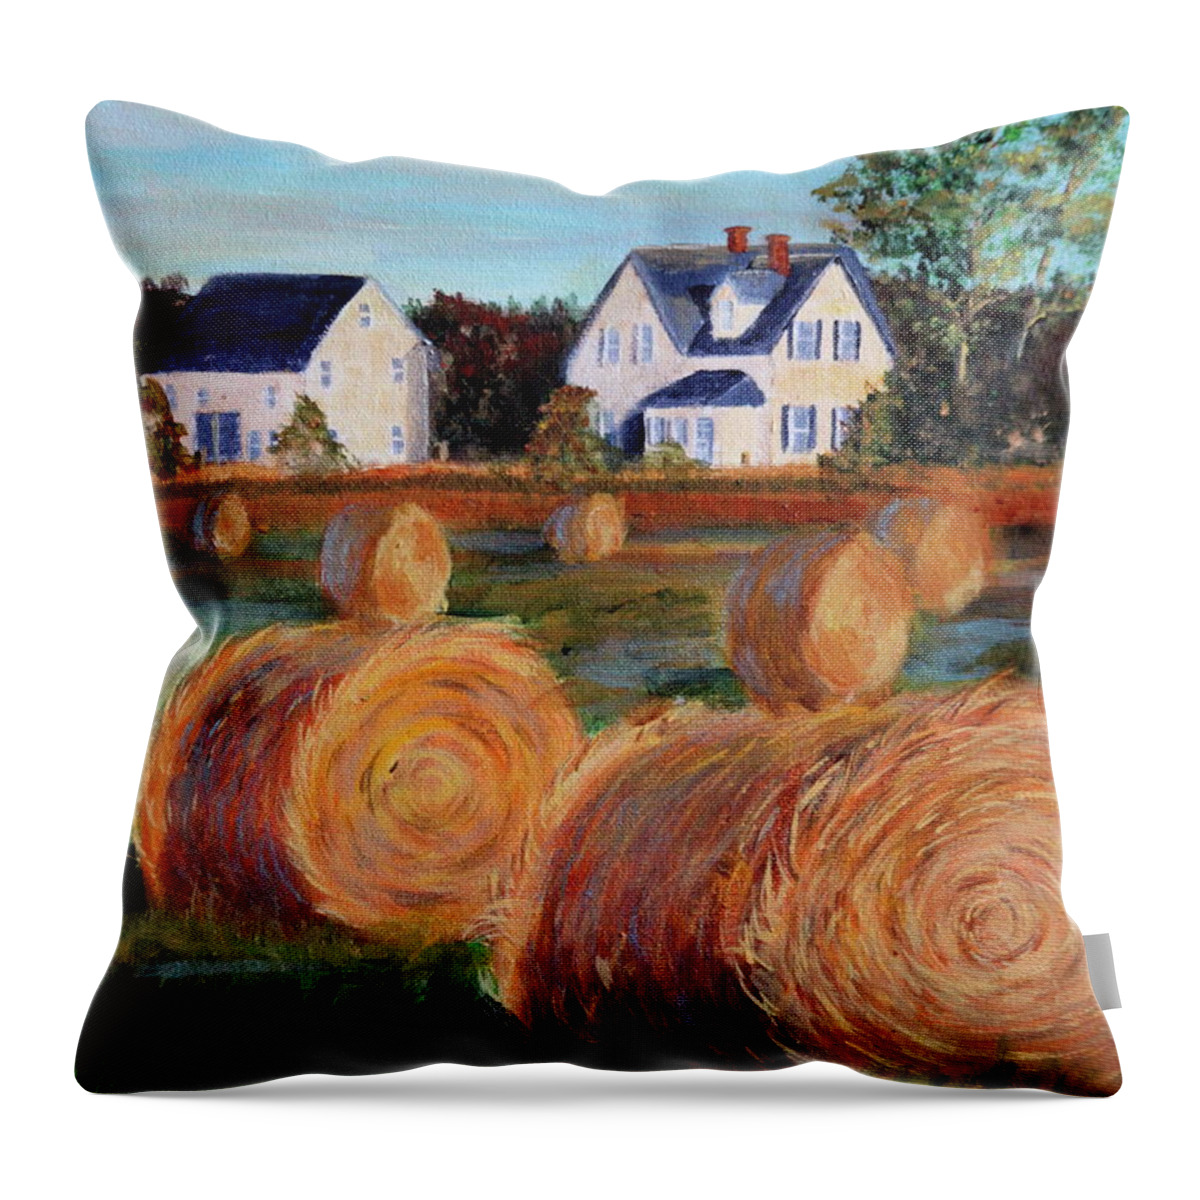 Little Sands Throw Pillow featuring the painting Golden Glow by Lorraine Vatcher